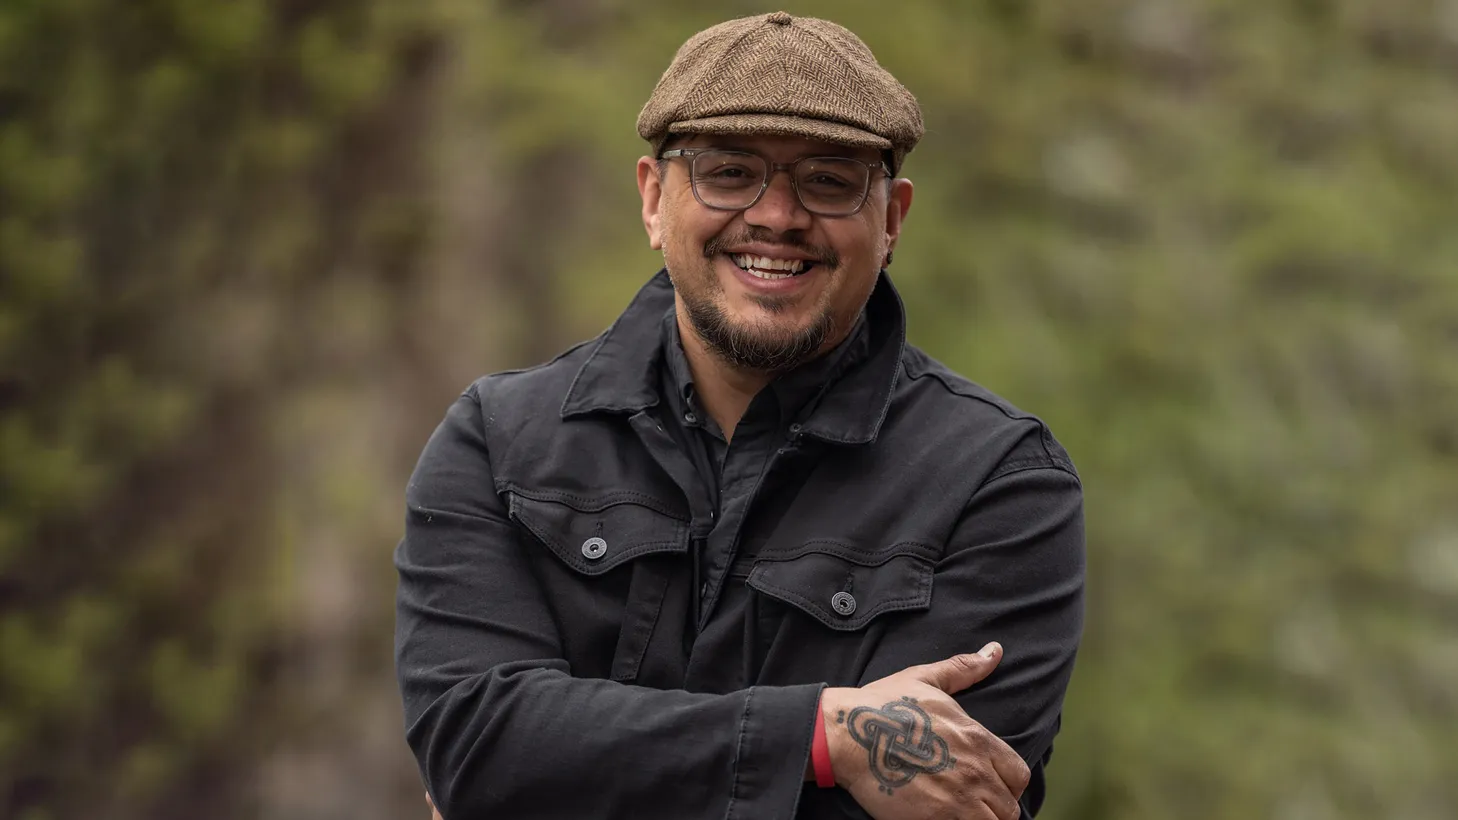 Sterlin Harjo co-created the comedy series “Reservation Dogs” on FX.